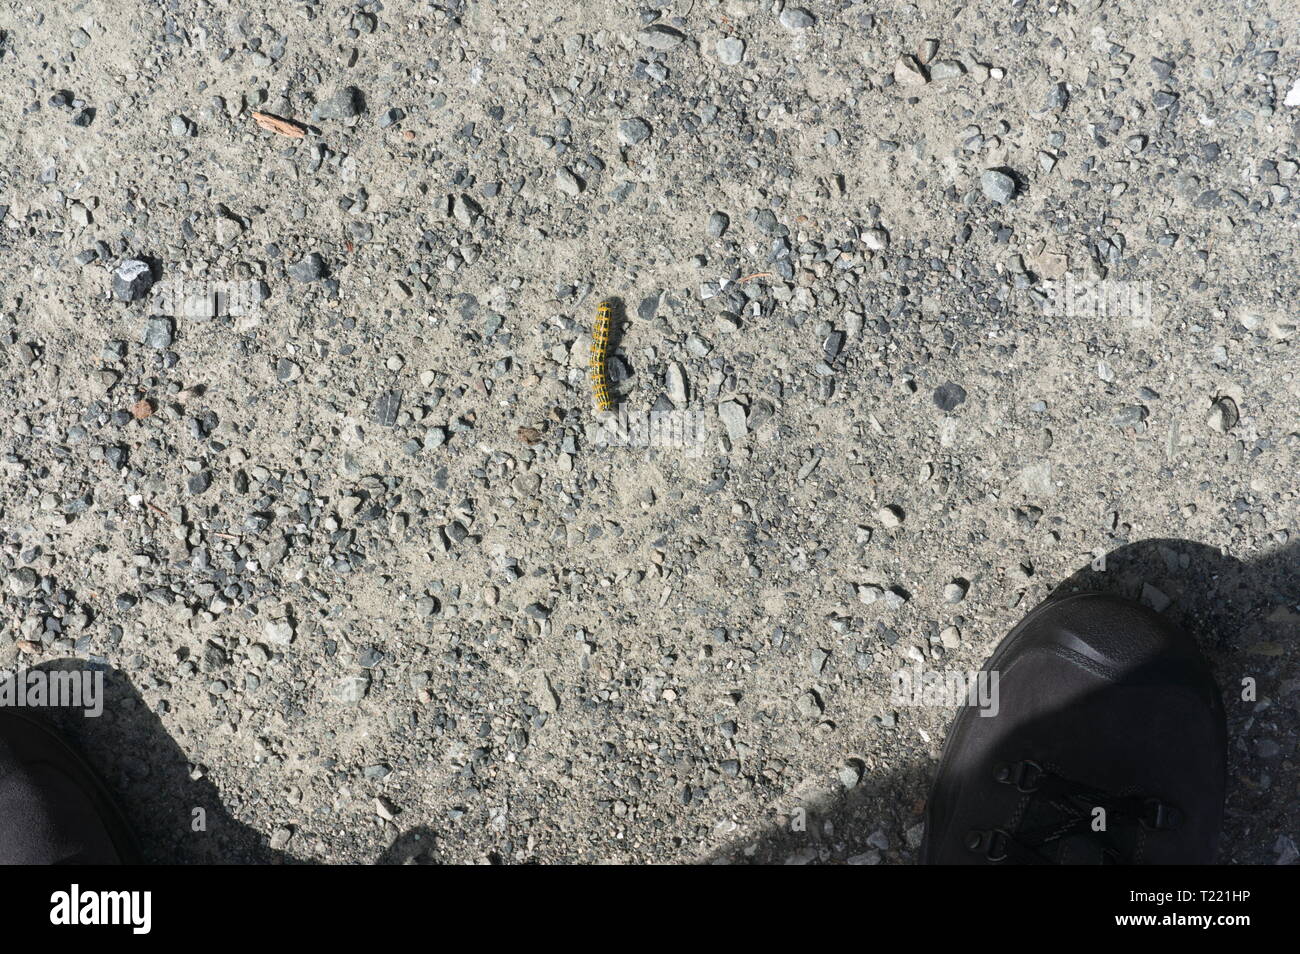 Caterpillar isolated on a hiking trail, on concret, stone, in the alps, germany Stock Photo